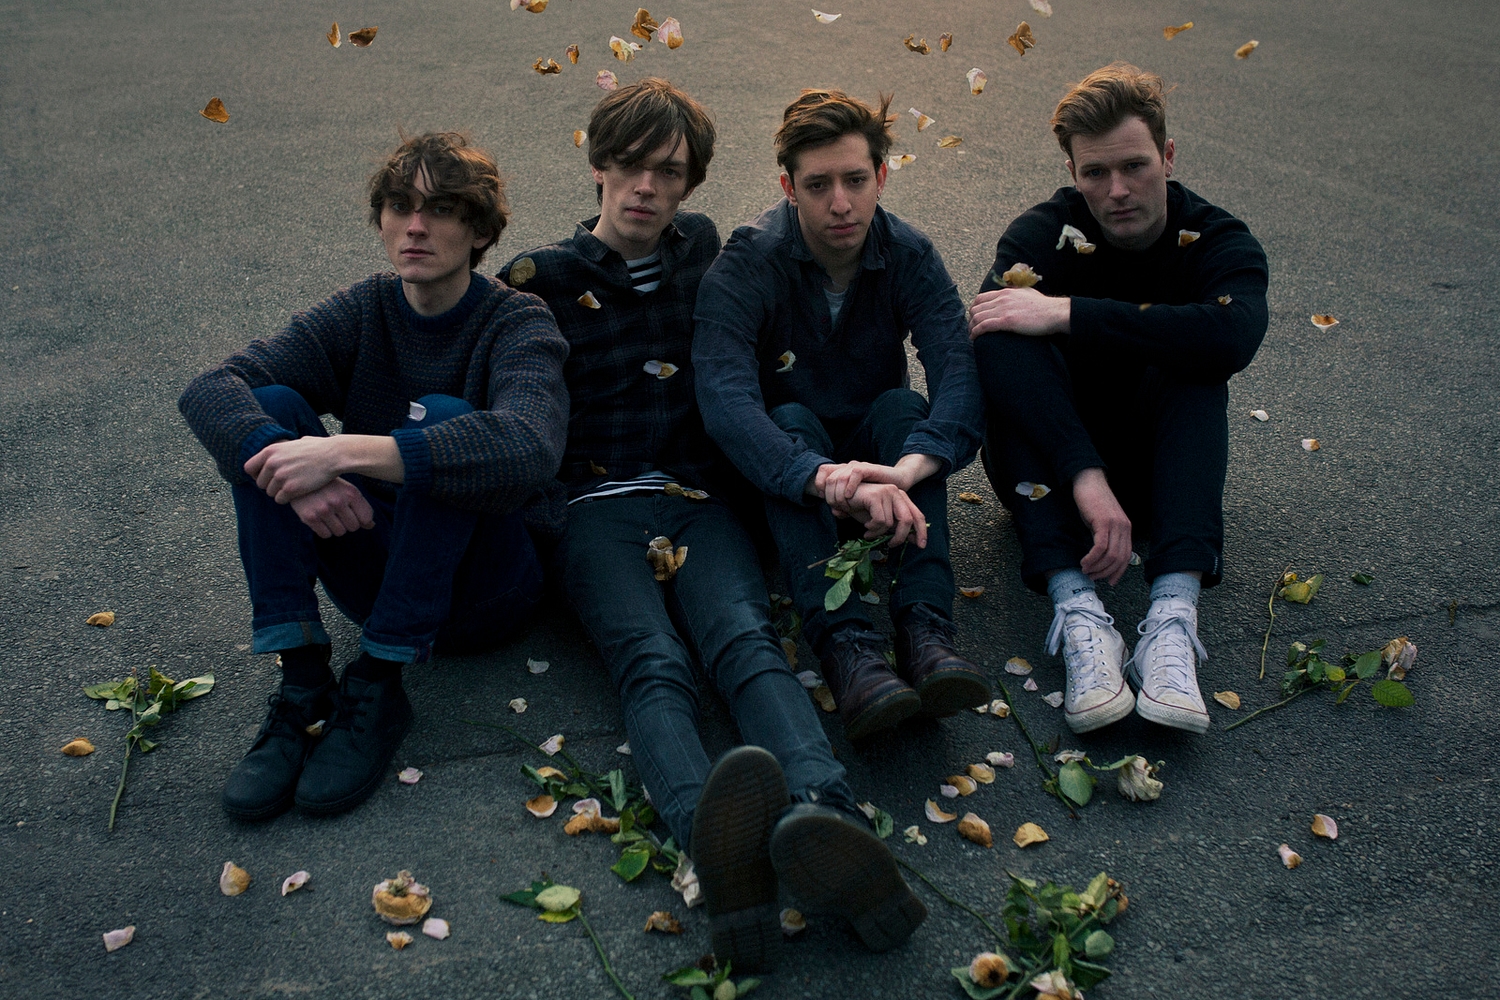 Gengahr discuss their debut album: “It was our baby, really”